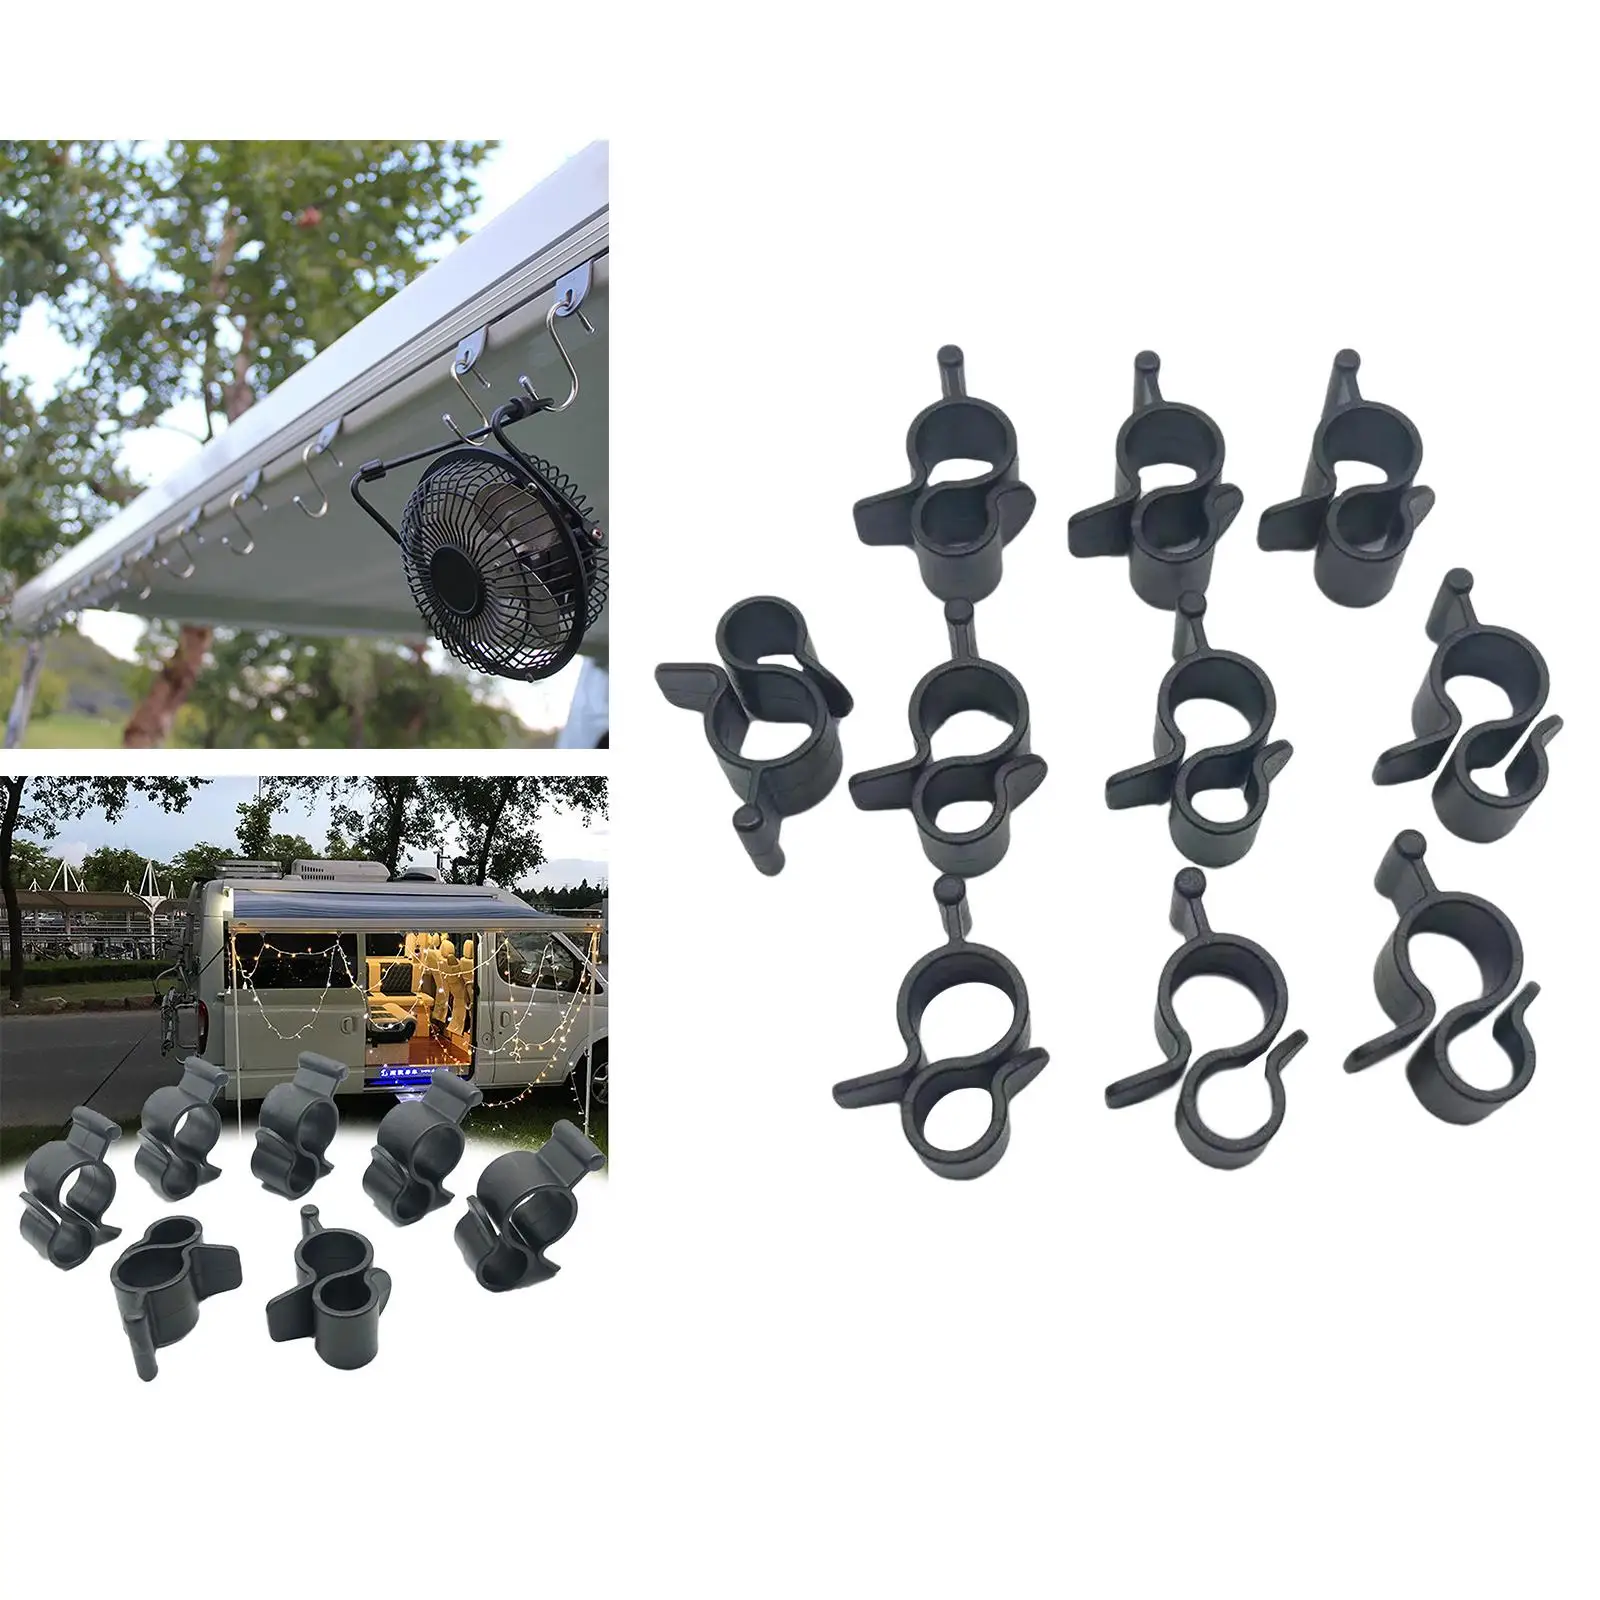 10 Pieces Awning Clips Standard Camping String Light